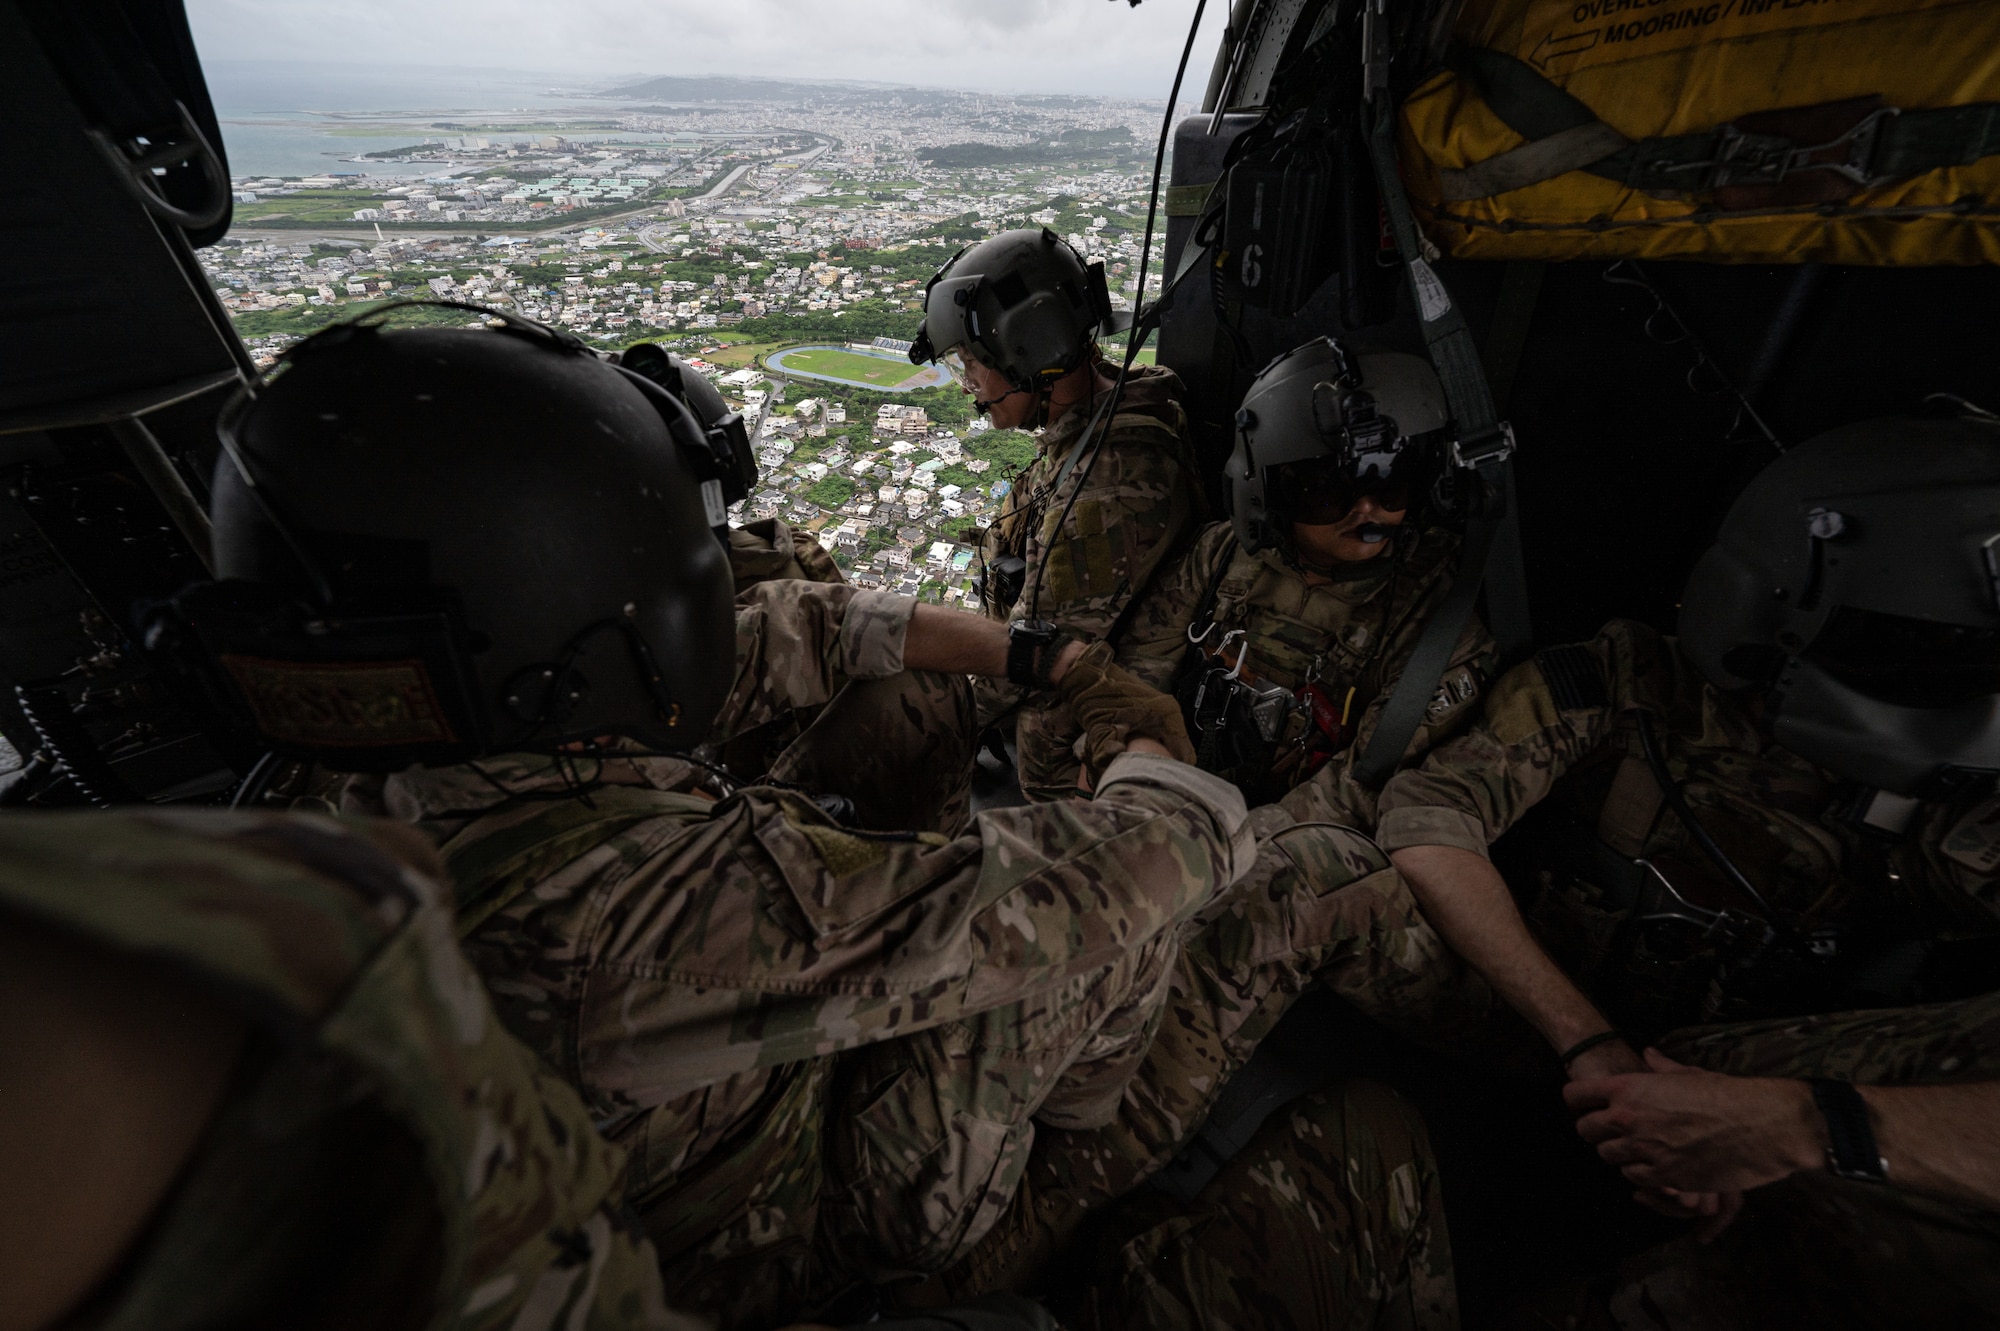 Airman ride in helicopter.